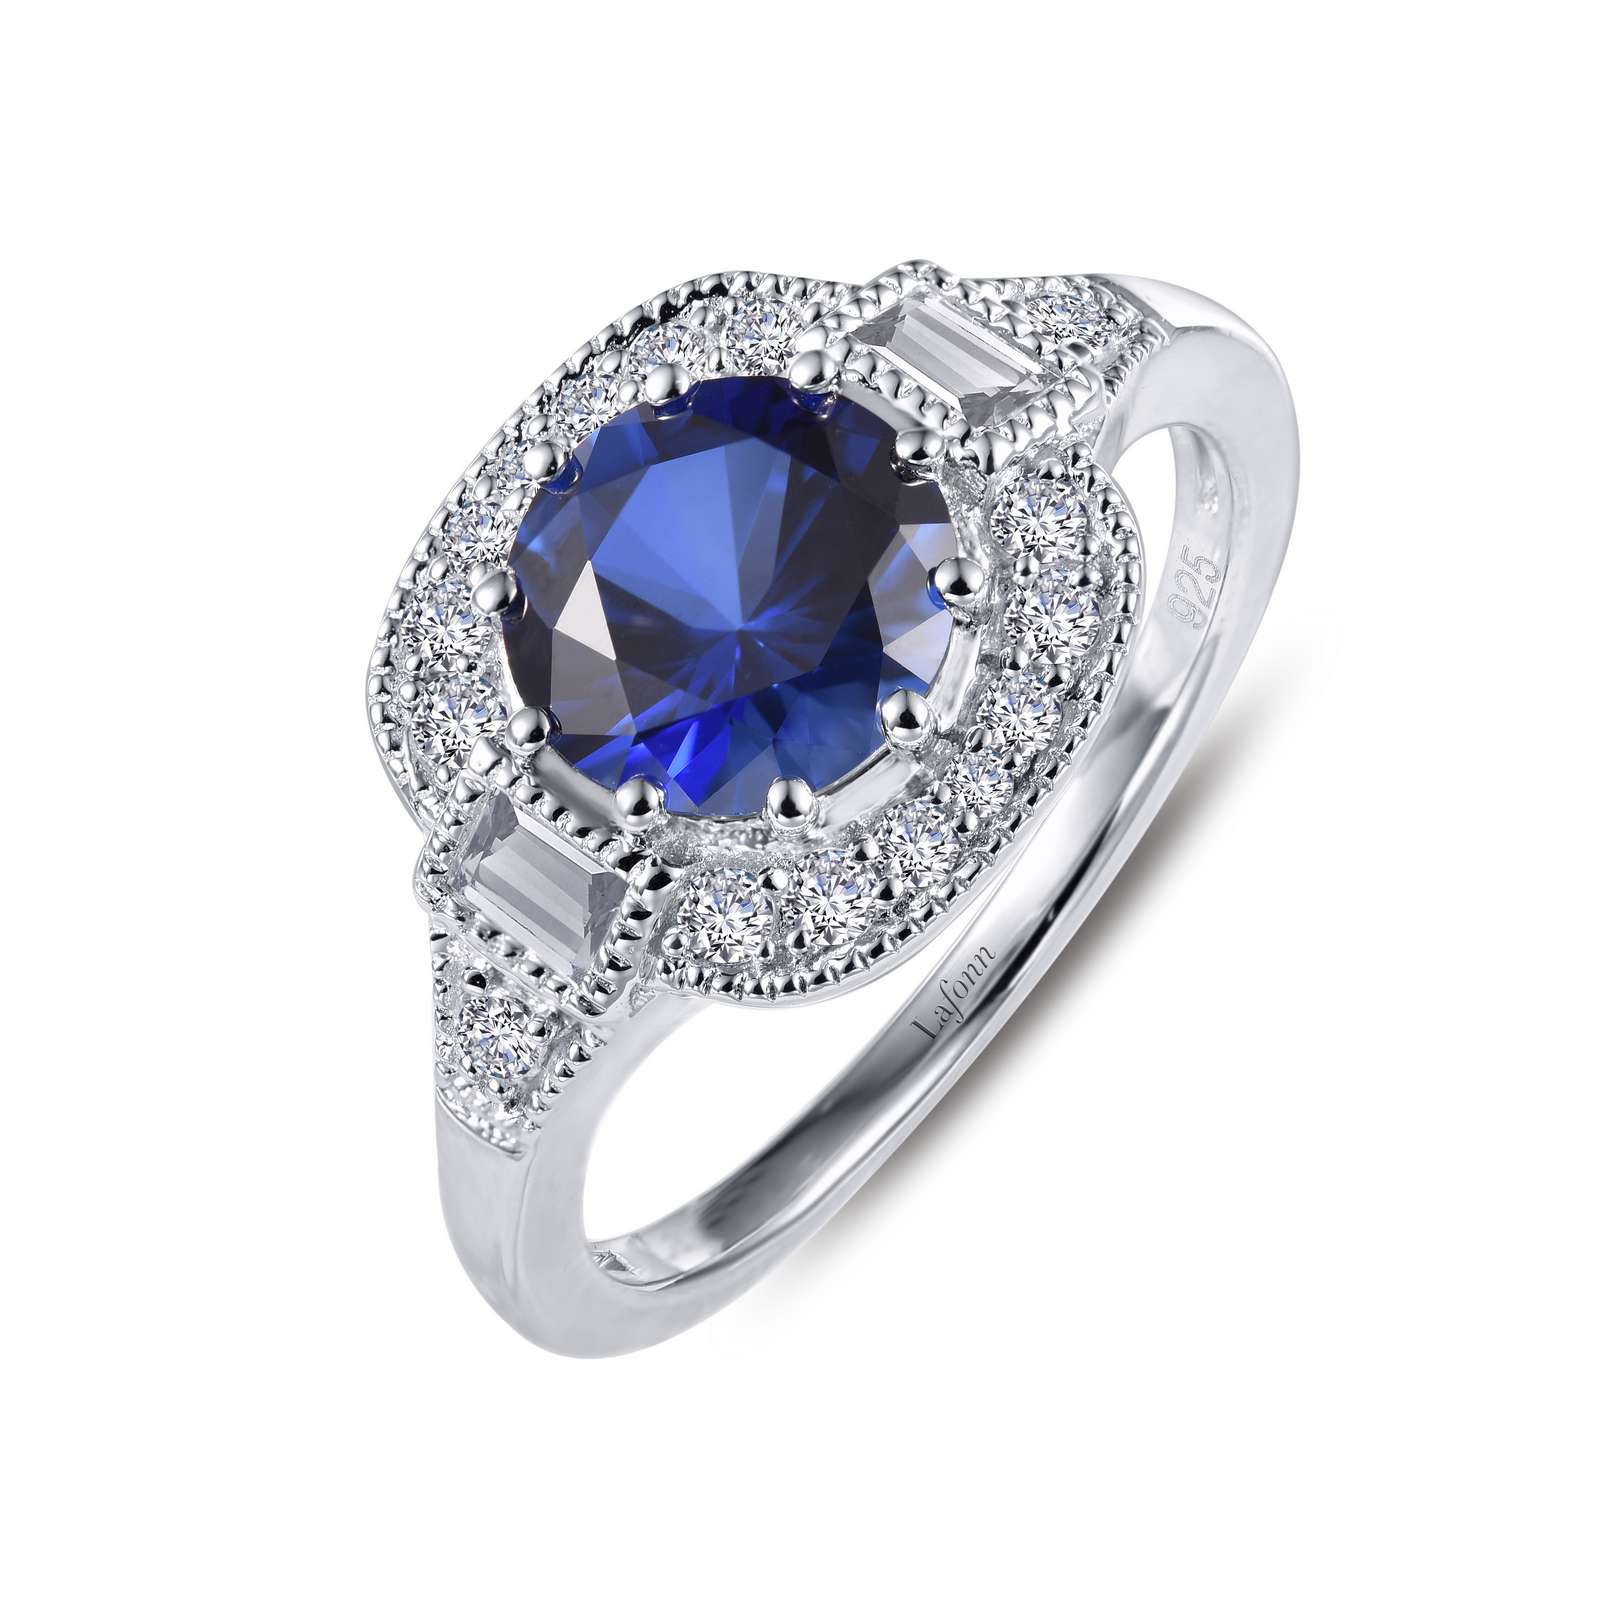 Heritage Synthetic Sapphire Platinum Bonded Ring Griner Jewelry Co. Moultrie, GA